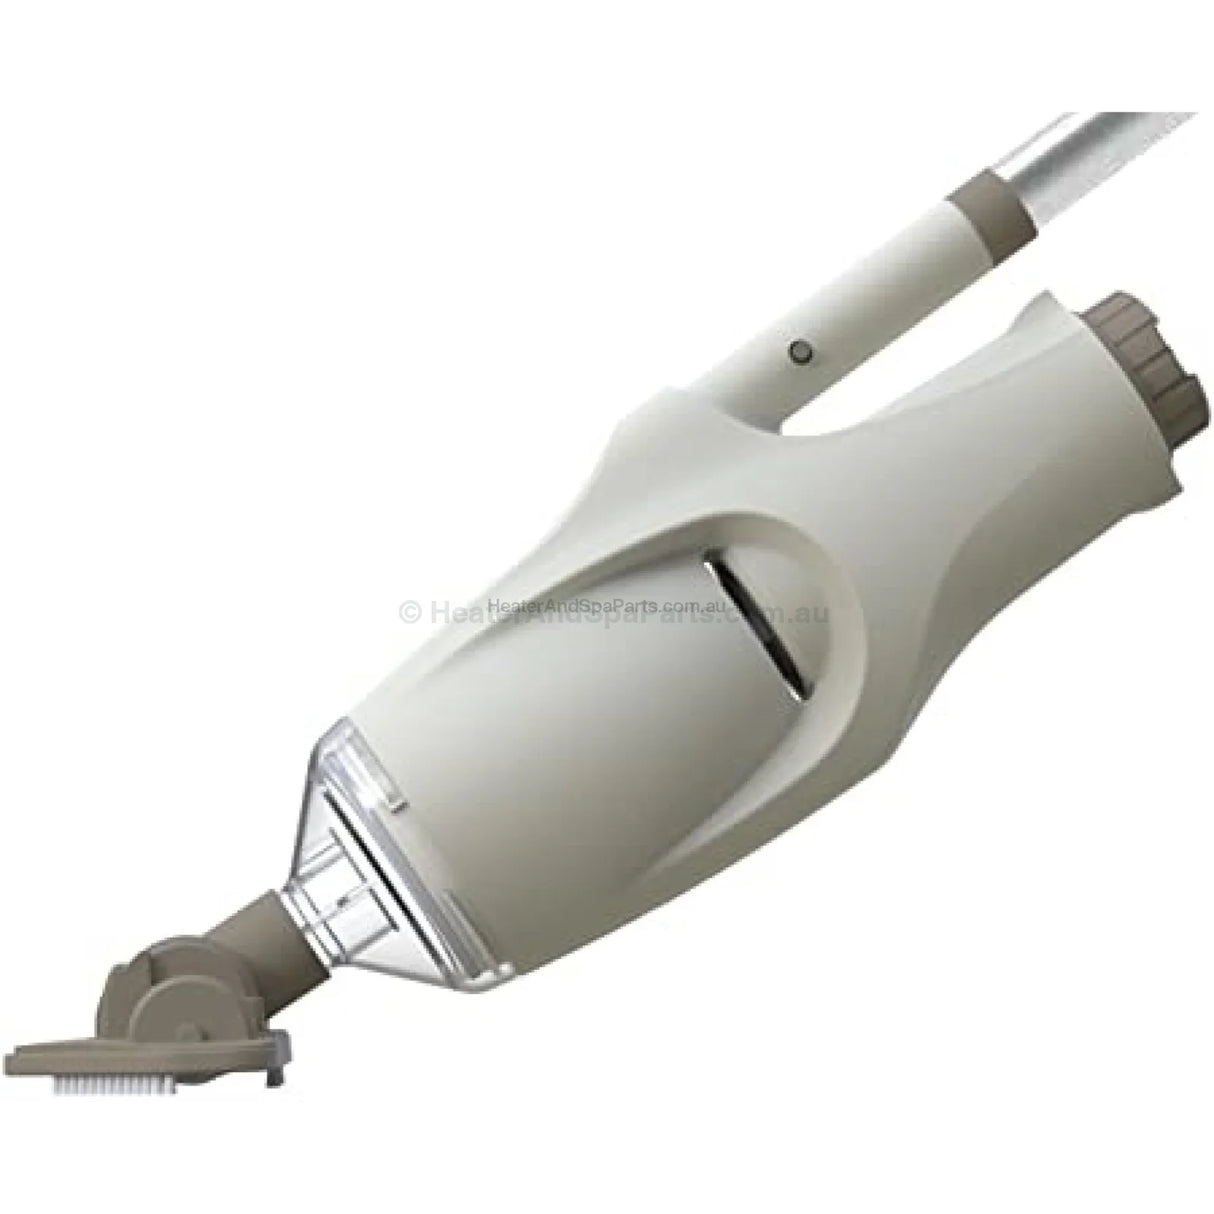 Boreal Telsa 05 - Rechargeable Cordless Spa Vacuum - Heater and Spa Parts